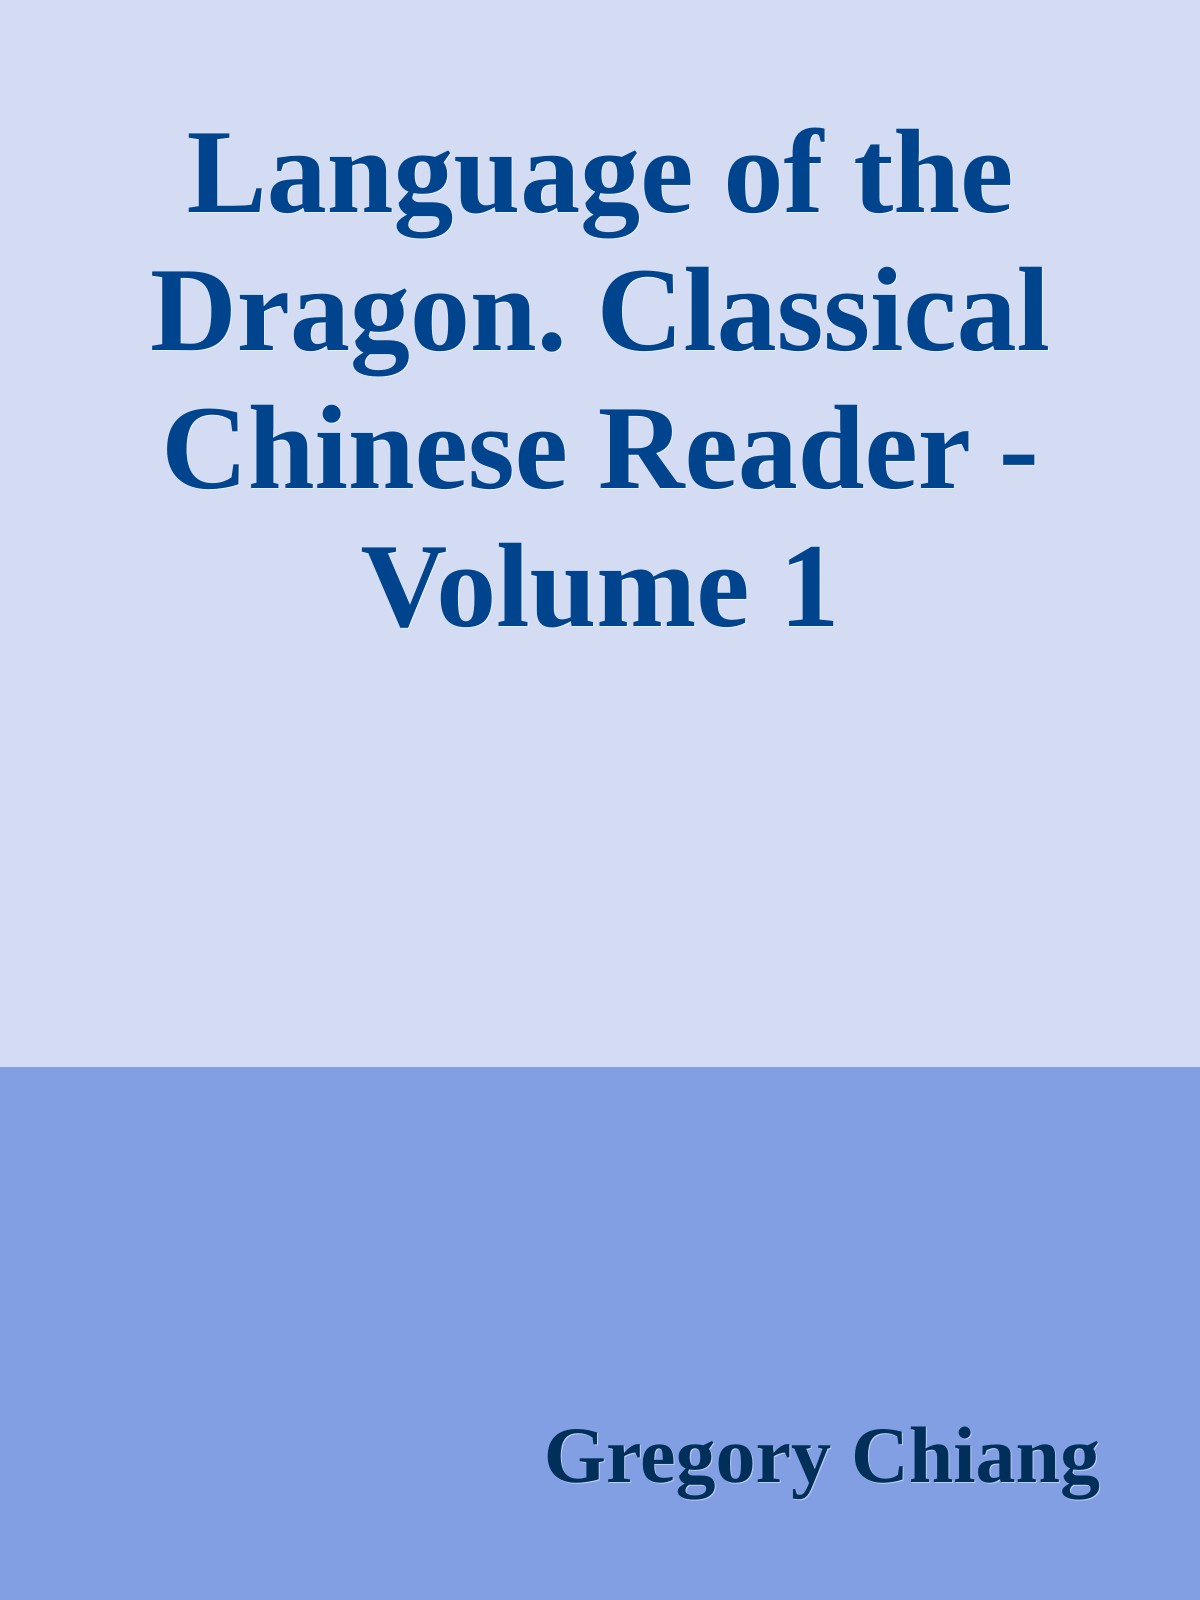 Language of the Dragon. Classical Chinese Reader - Volume 1